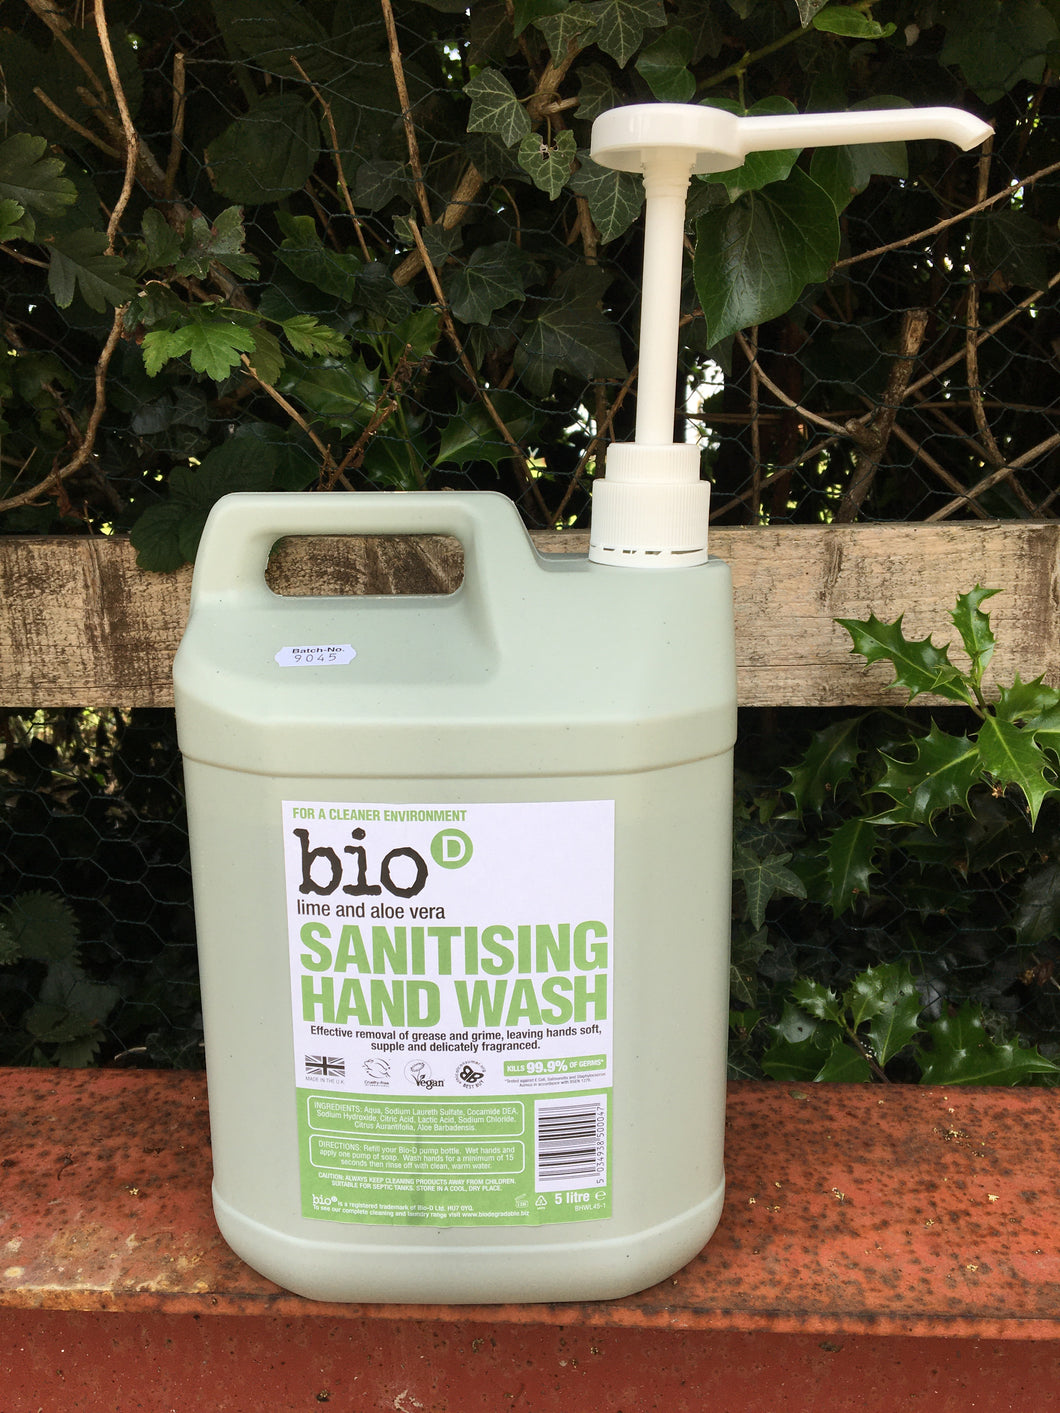 Bio D Lime and Aloe Vera Sanitising Hand Wash - Refill only